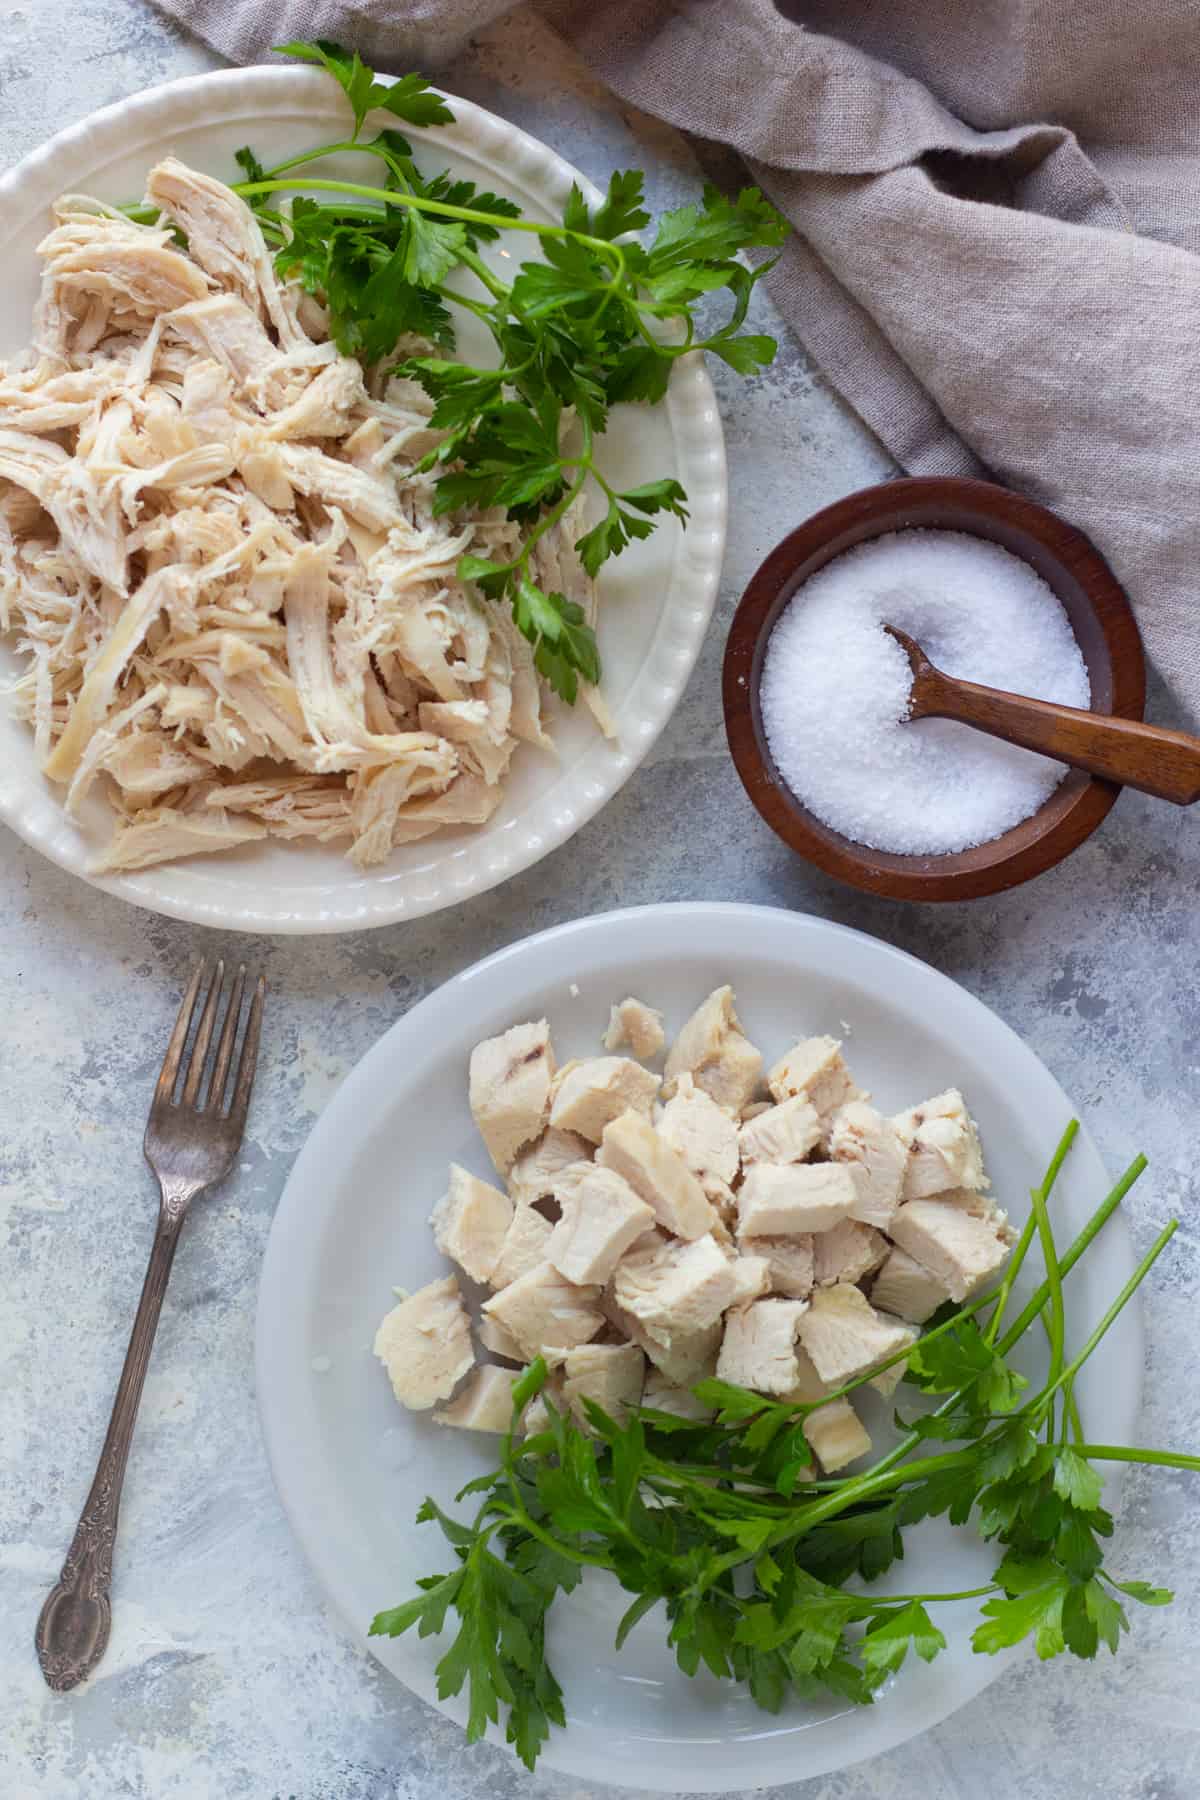 Learn how to make juicy and tender instant pot poached chicken. This easy instant pot chicken breast recipe is a game changer. You can use this method to make pressure cooker chicken breast to use in salads, rice dishes, or sandwiches. 